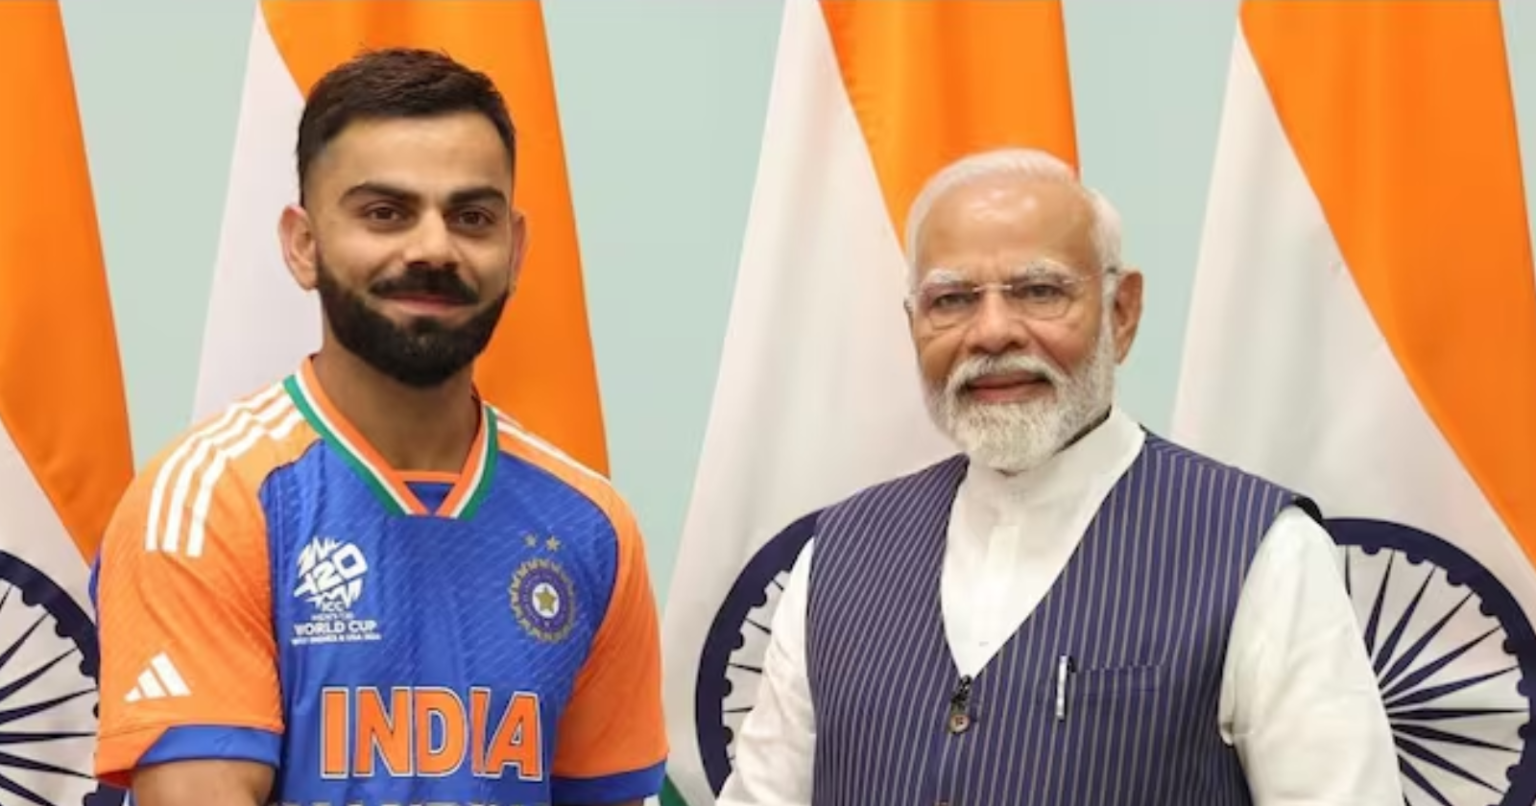 Virat Kohli’s Heartfelt Post Goes Viral After Meeting Honorable PM Modi At His Residence Upon Returning to India